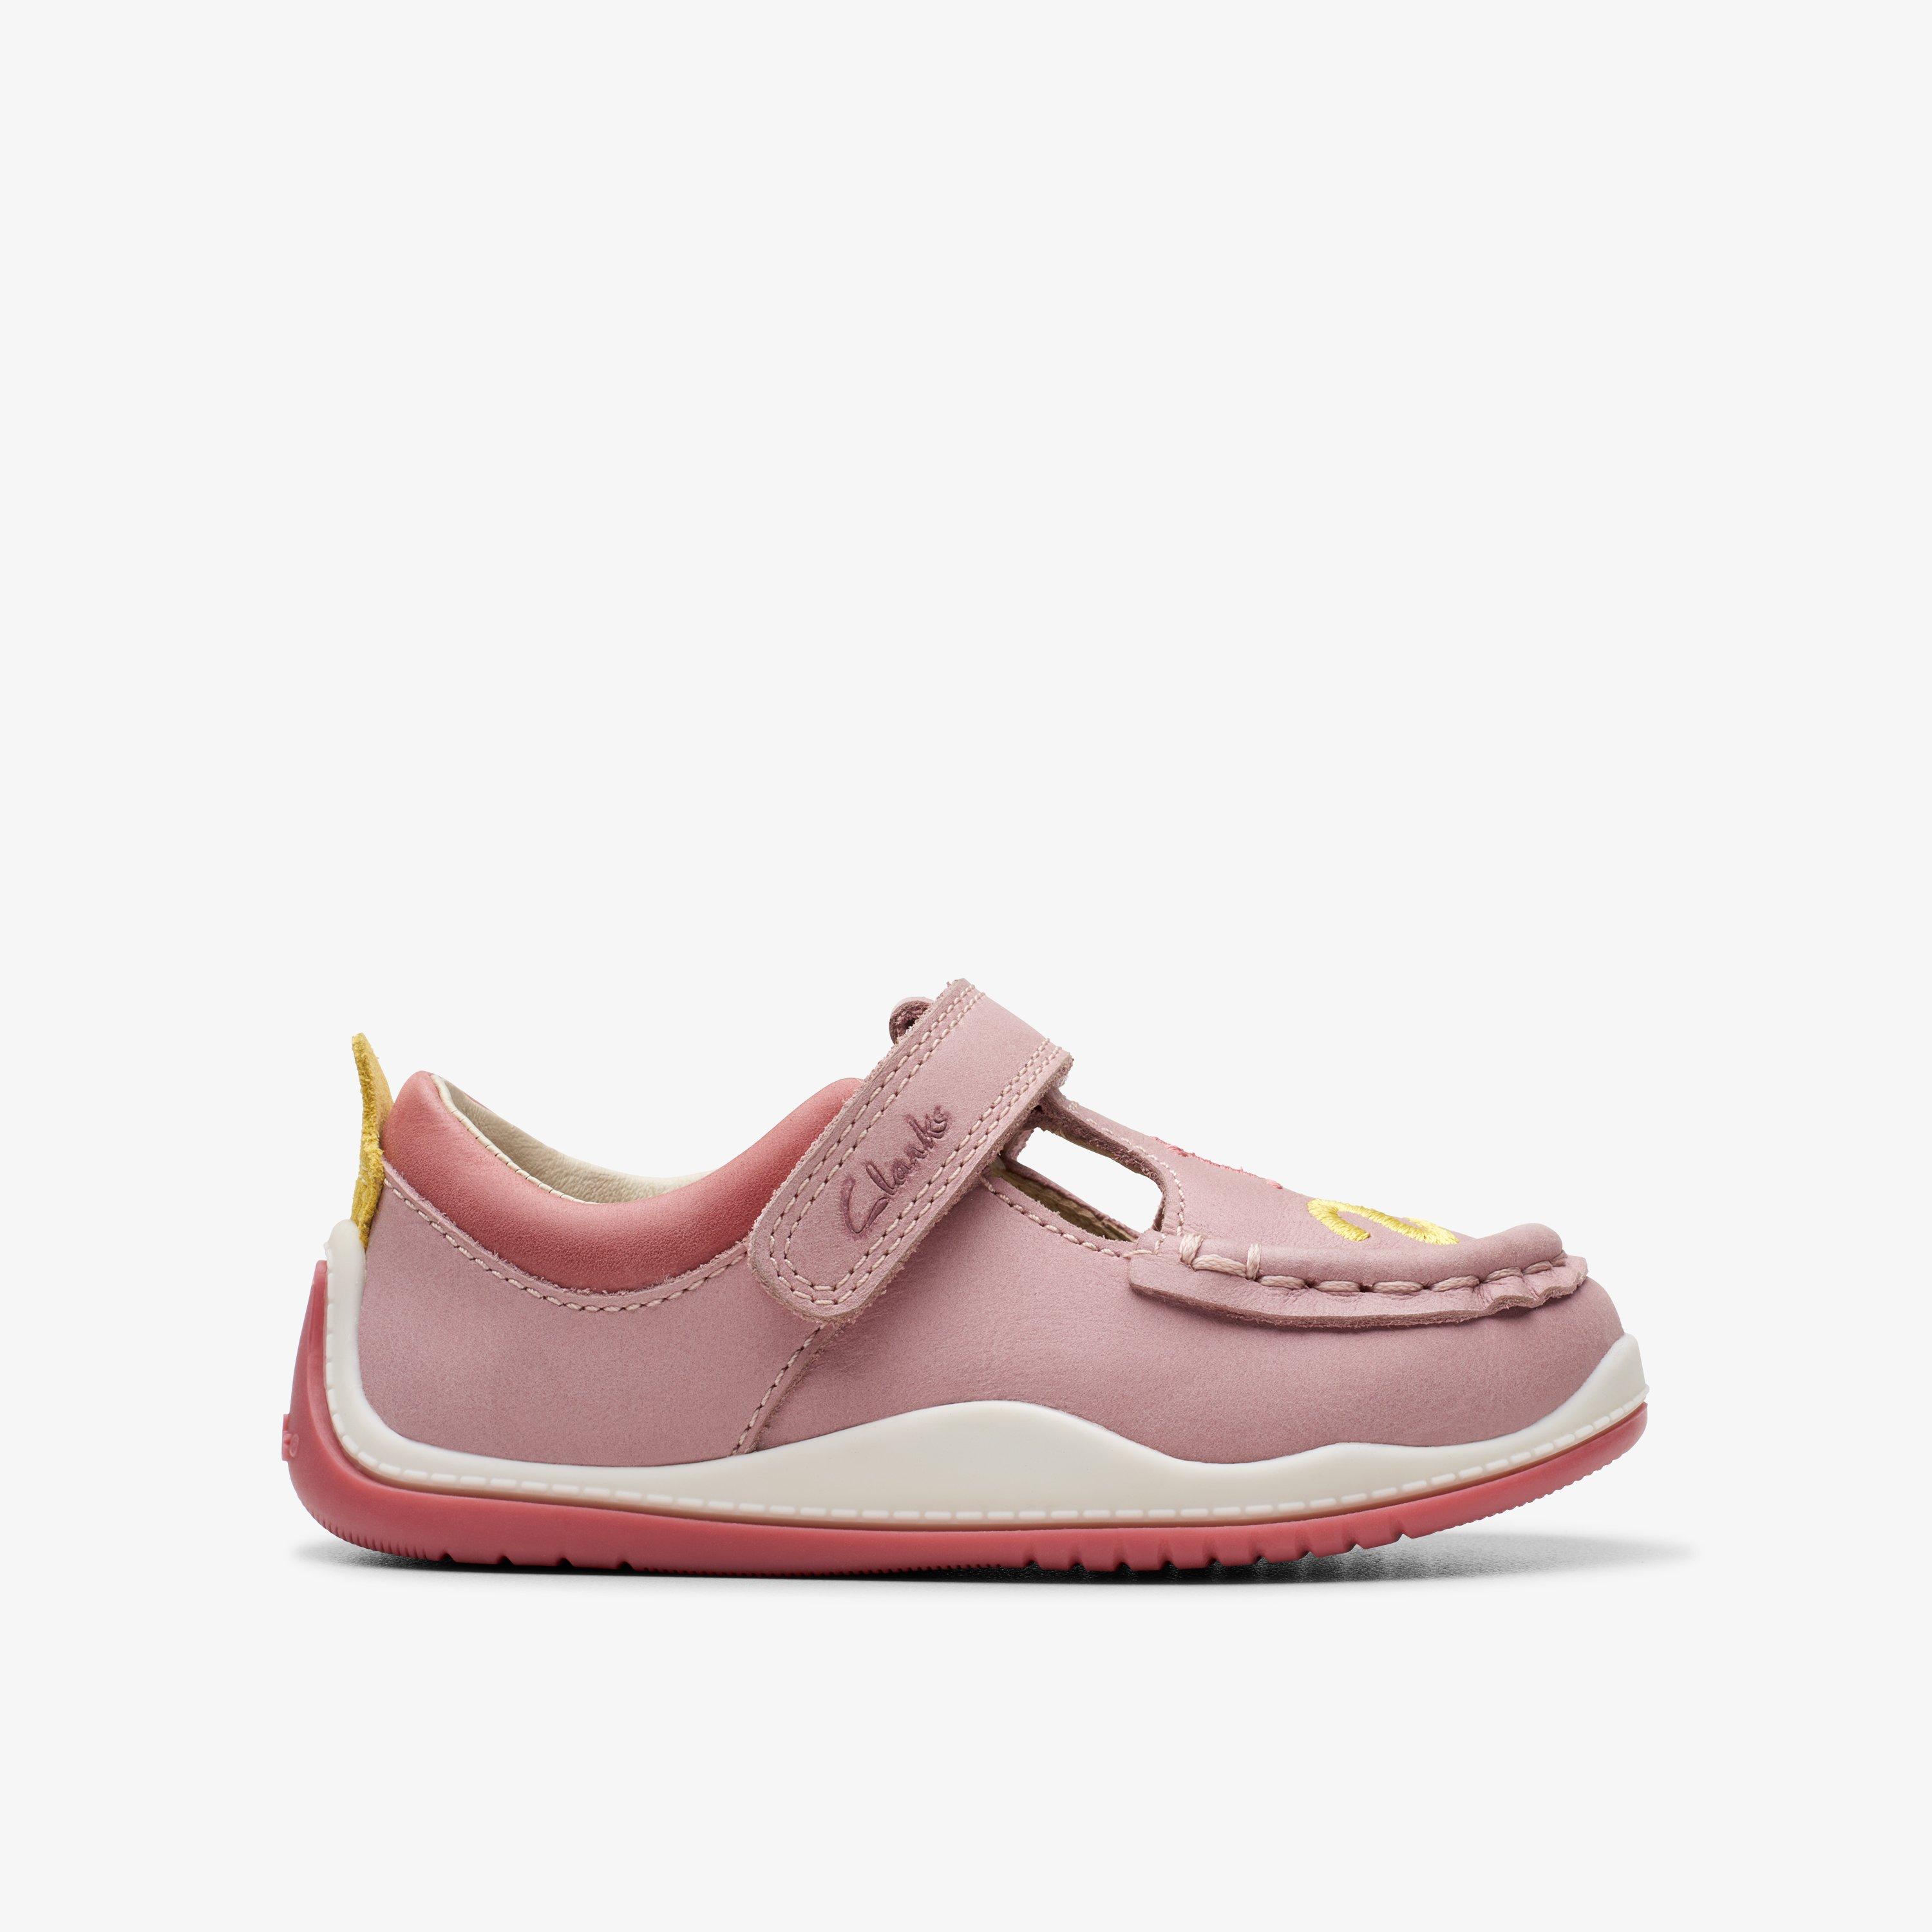 Girls Noodle Shine Toddler Dusty Pink Leather T Bar Shoes | Clarks UK